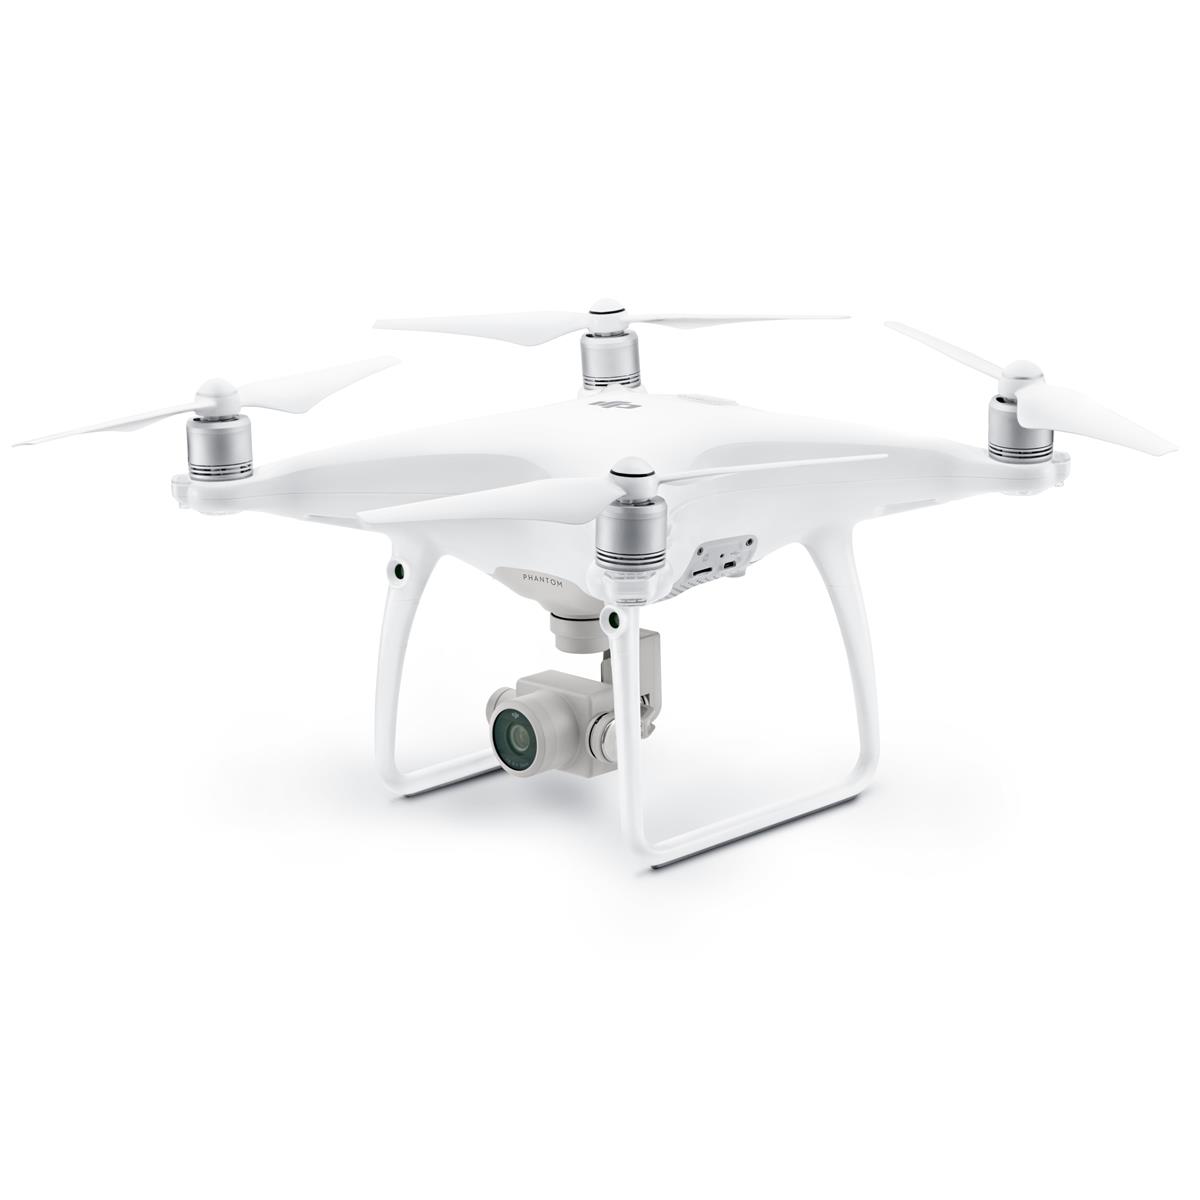 Image of DJI Phantom 4 Advanced Quadcopter Drone with Standard Remote Controller